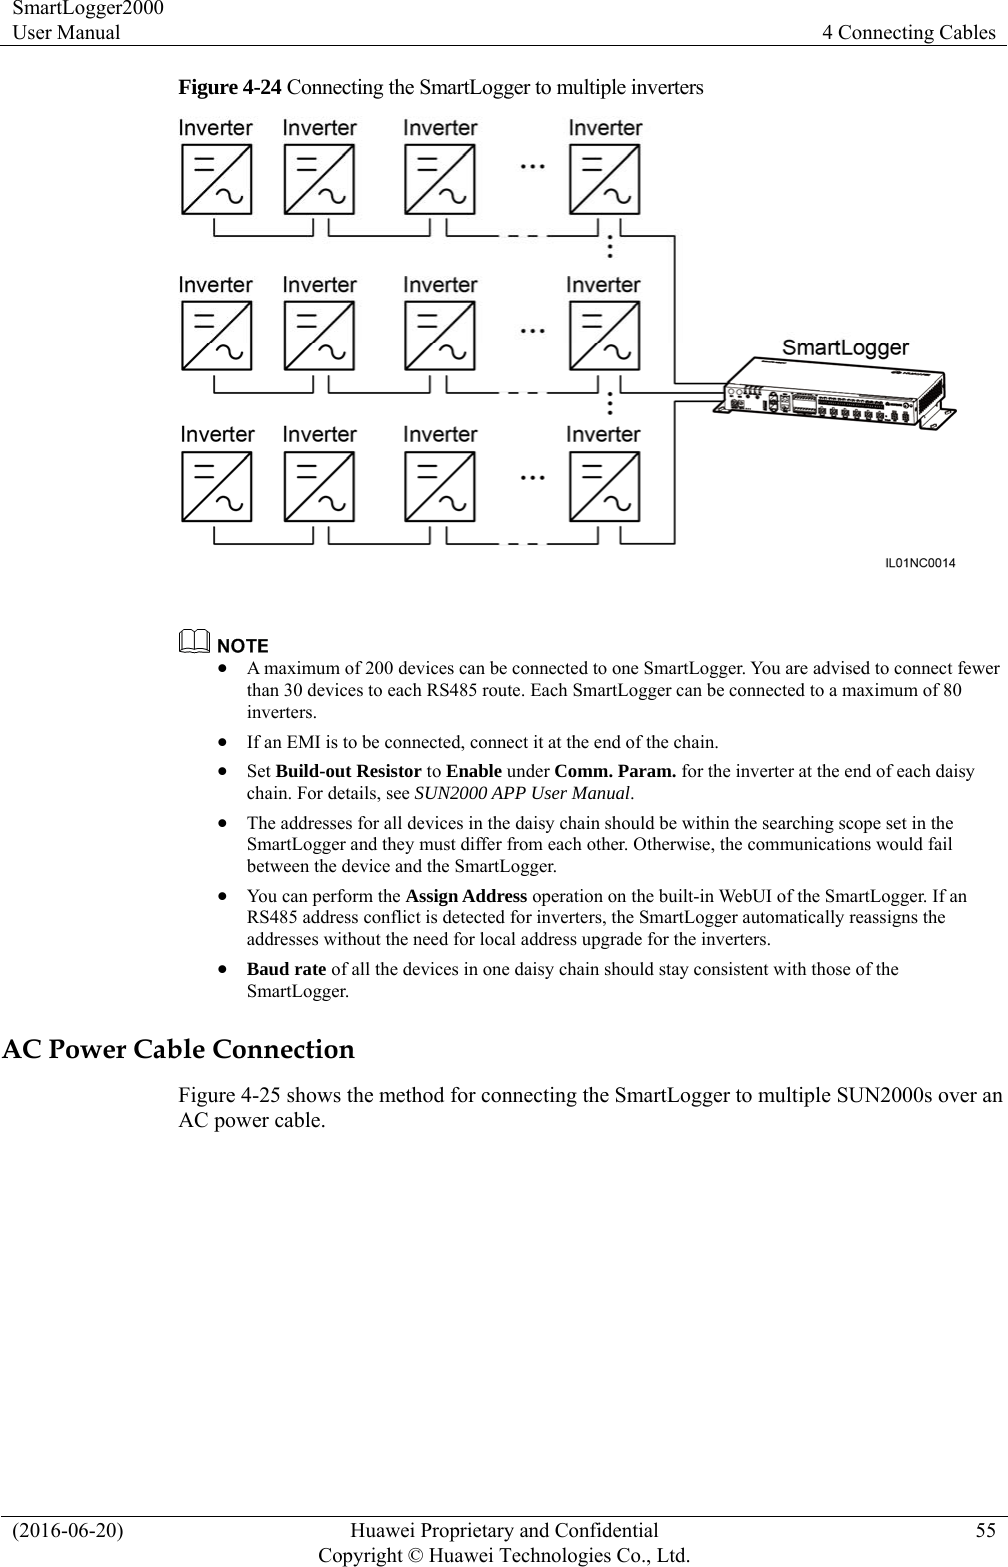 SmartLogger2000 User Manual  4 Connecting Cables (2016-06-20)  Huawei Proprietary and Confidential         Copyright © Huawei Technologies Co., Ltd.55 Figure 4-24 Connecting the SmartLogger to multiple inverters     A maximum of 200 devices can be connected to one SmartLogger. You are advised to connect fewer than 30 devices to each RS485 route. Each SmartLogger can be connected to a maximum of 80 inverters.   If an EMI is to be connected, connect it at the end of the chain.    Set Build-out Resistor to Enable under Comm. Param. for the inverter at the end of each daisy chain. For details, see SUN2000 APP User Manual.  The addresses for all devices in the daisy chain should be within the searching scope set in the SmartLogger and they must differ from each other. Otherwise, the communications would fail between the device and the SmartLogger.  You can perform the Assign Address operation on the built-in WebUI of the SmartLogger. If an RS485 address conflict is detected for inverters, the SmartLogger automatically reassigns the addresses without the need for local address upgrade for the inverters.  Baud rate of all the devices in one daisy chain should stay consistent with those of the SmartLogger. AC Power Cable Connection Figure 4-25 shows the method for connecting the SmartLogger to multiple SUN2000s over an AC power cable.   